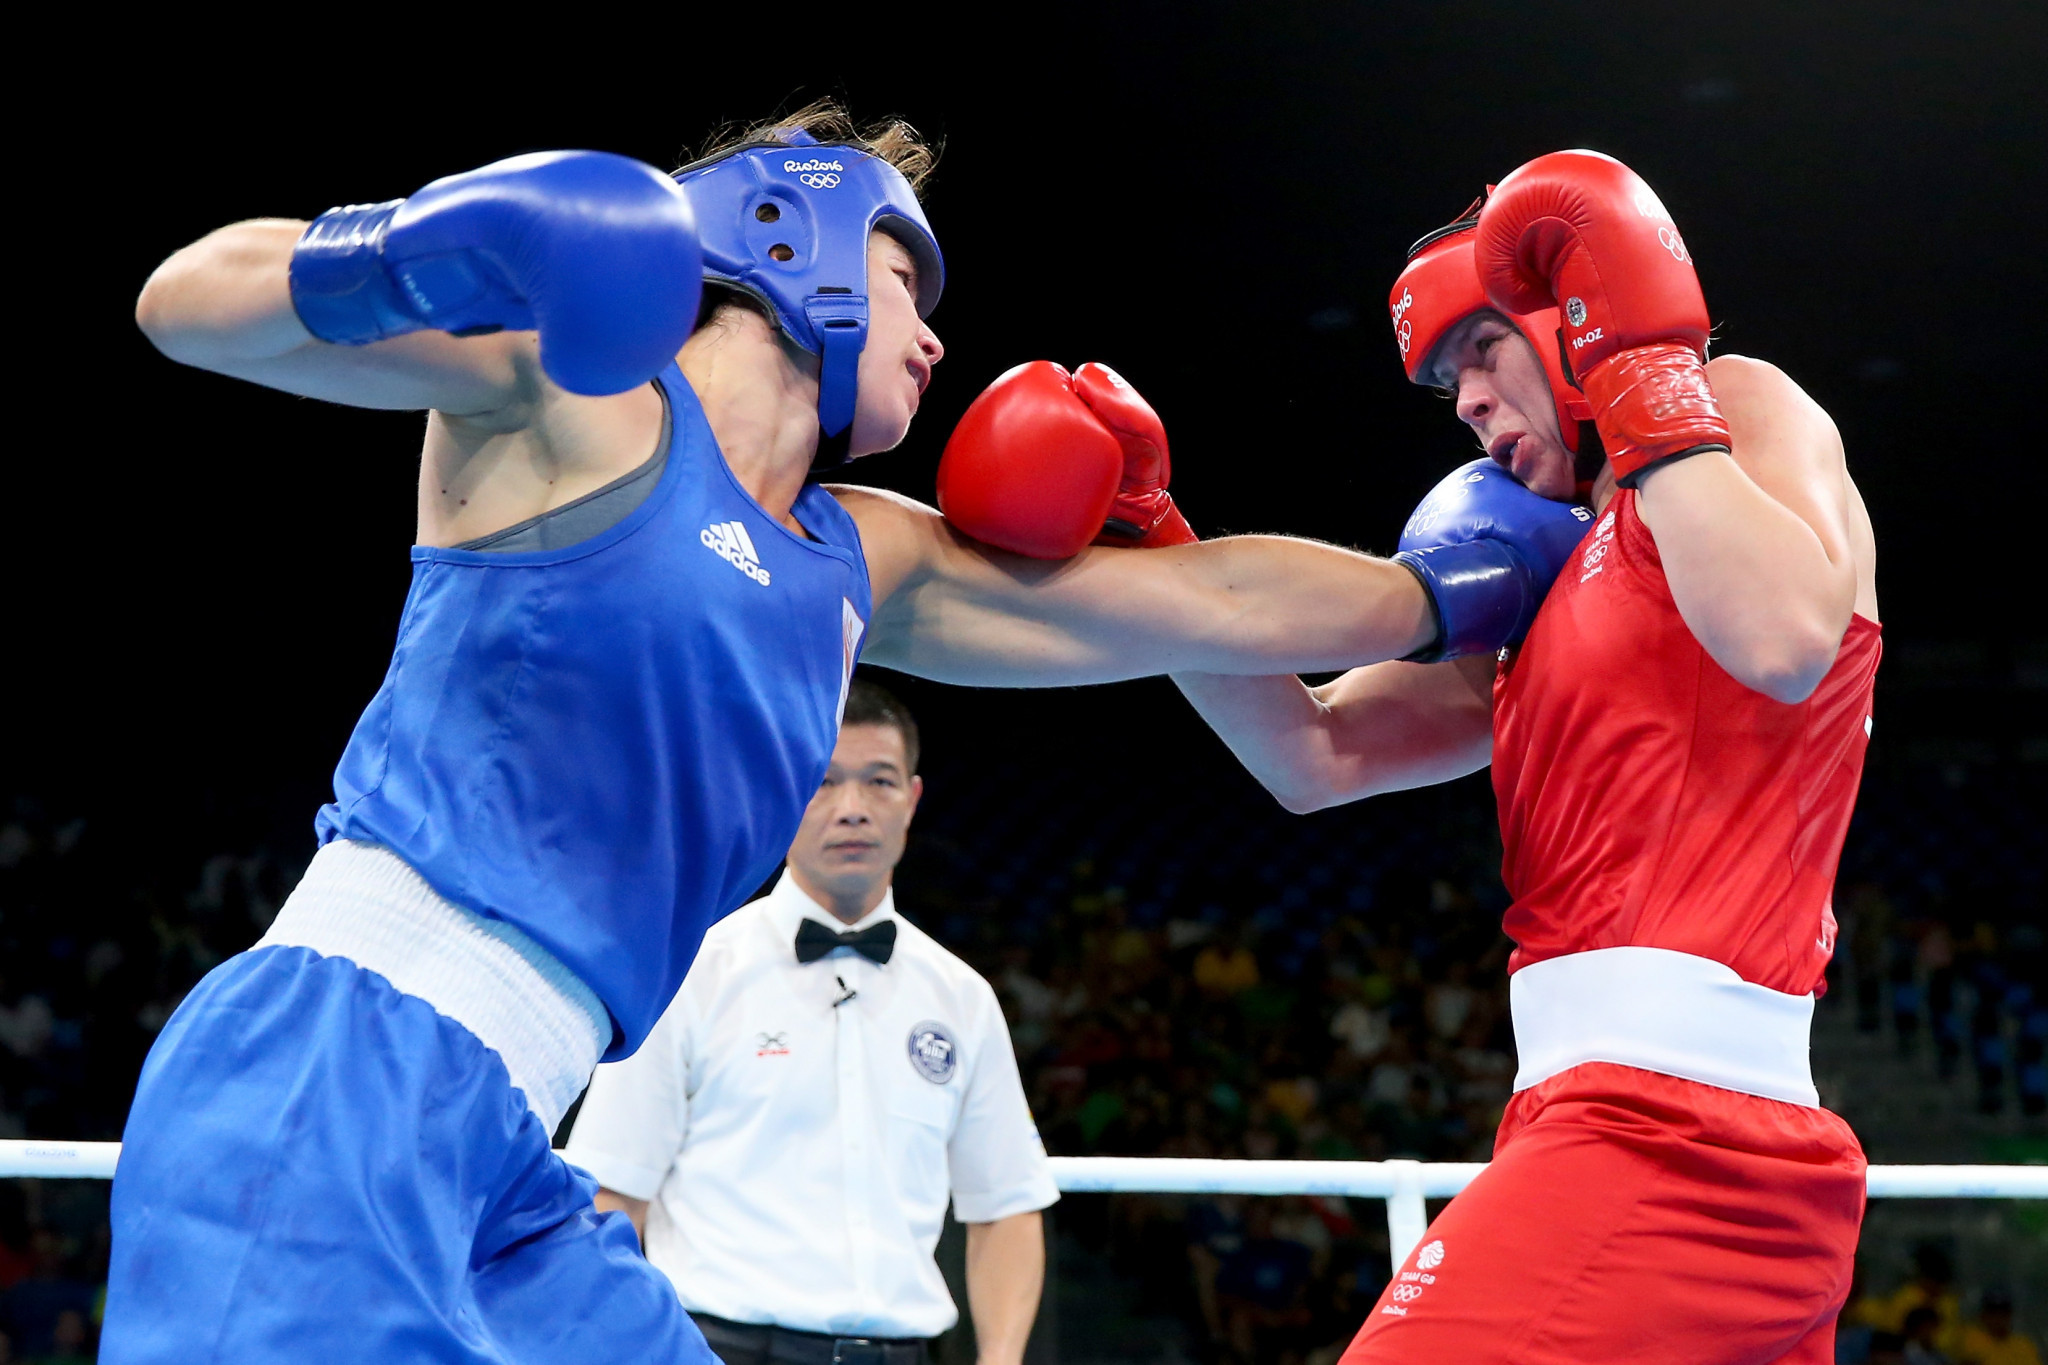 IOC taskforce to oversee organisation of boxing at Tokyo 2020 after AIBA suspended